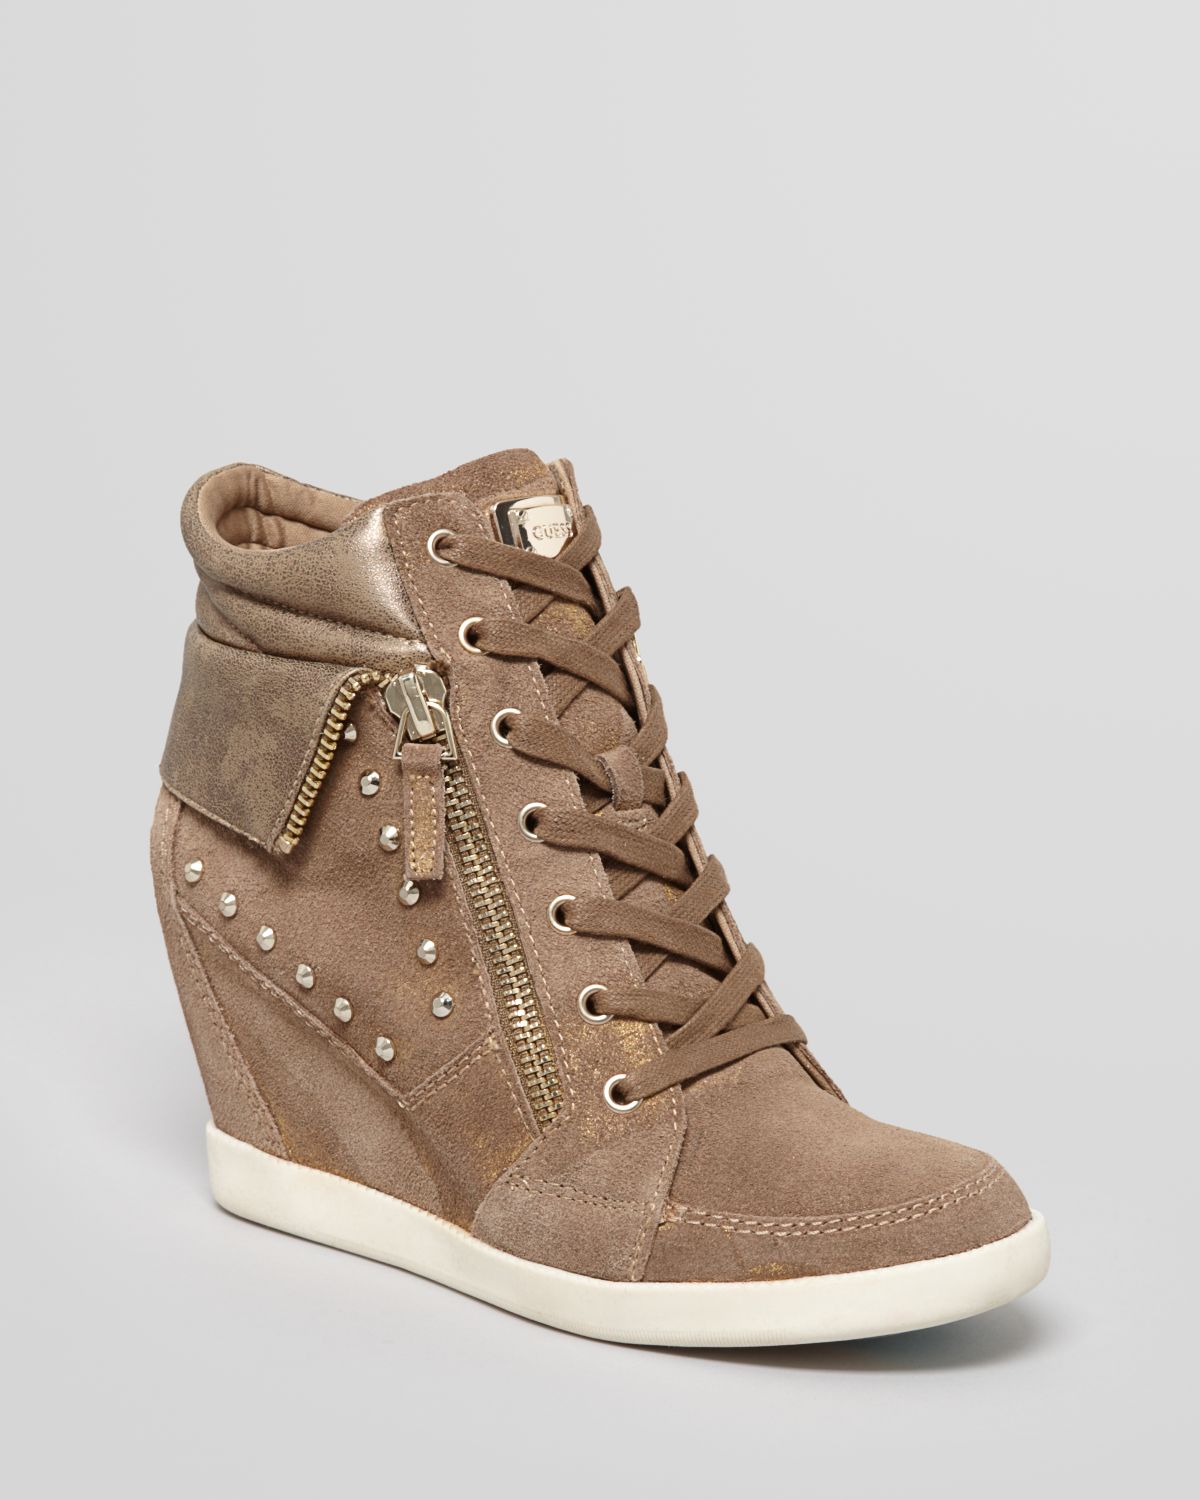 Lyst - Guess Wedge Sneakers Hitzo in Natural